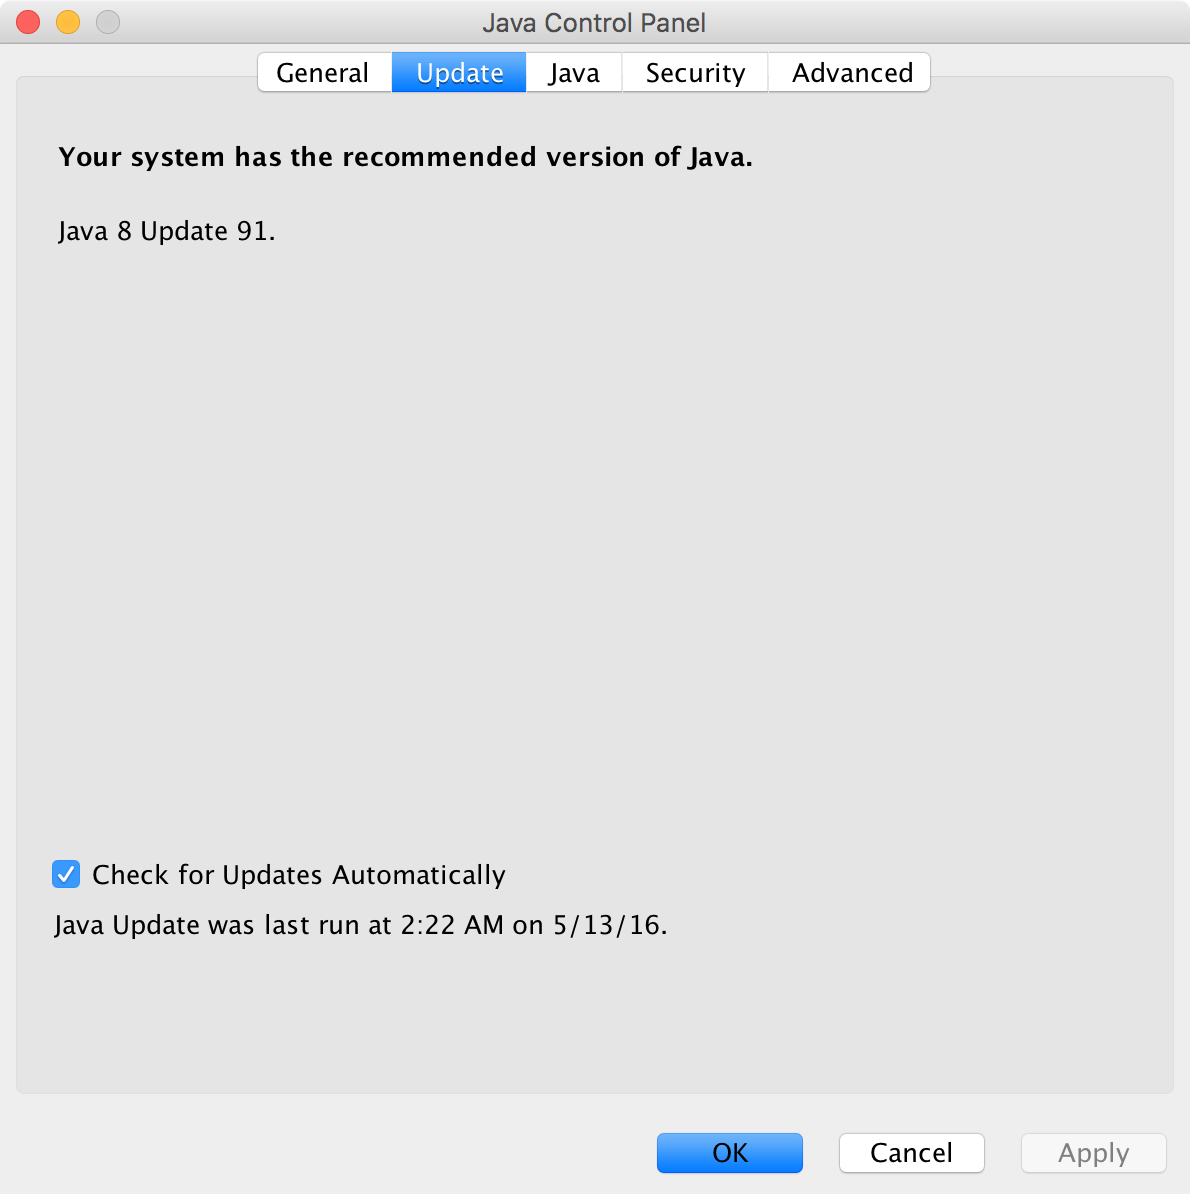 apple java for mac os x update 2